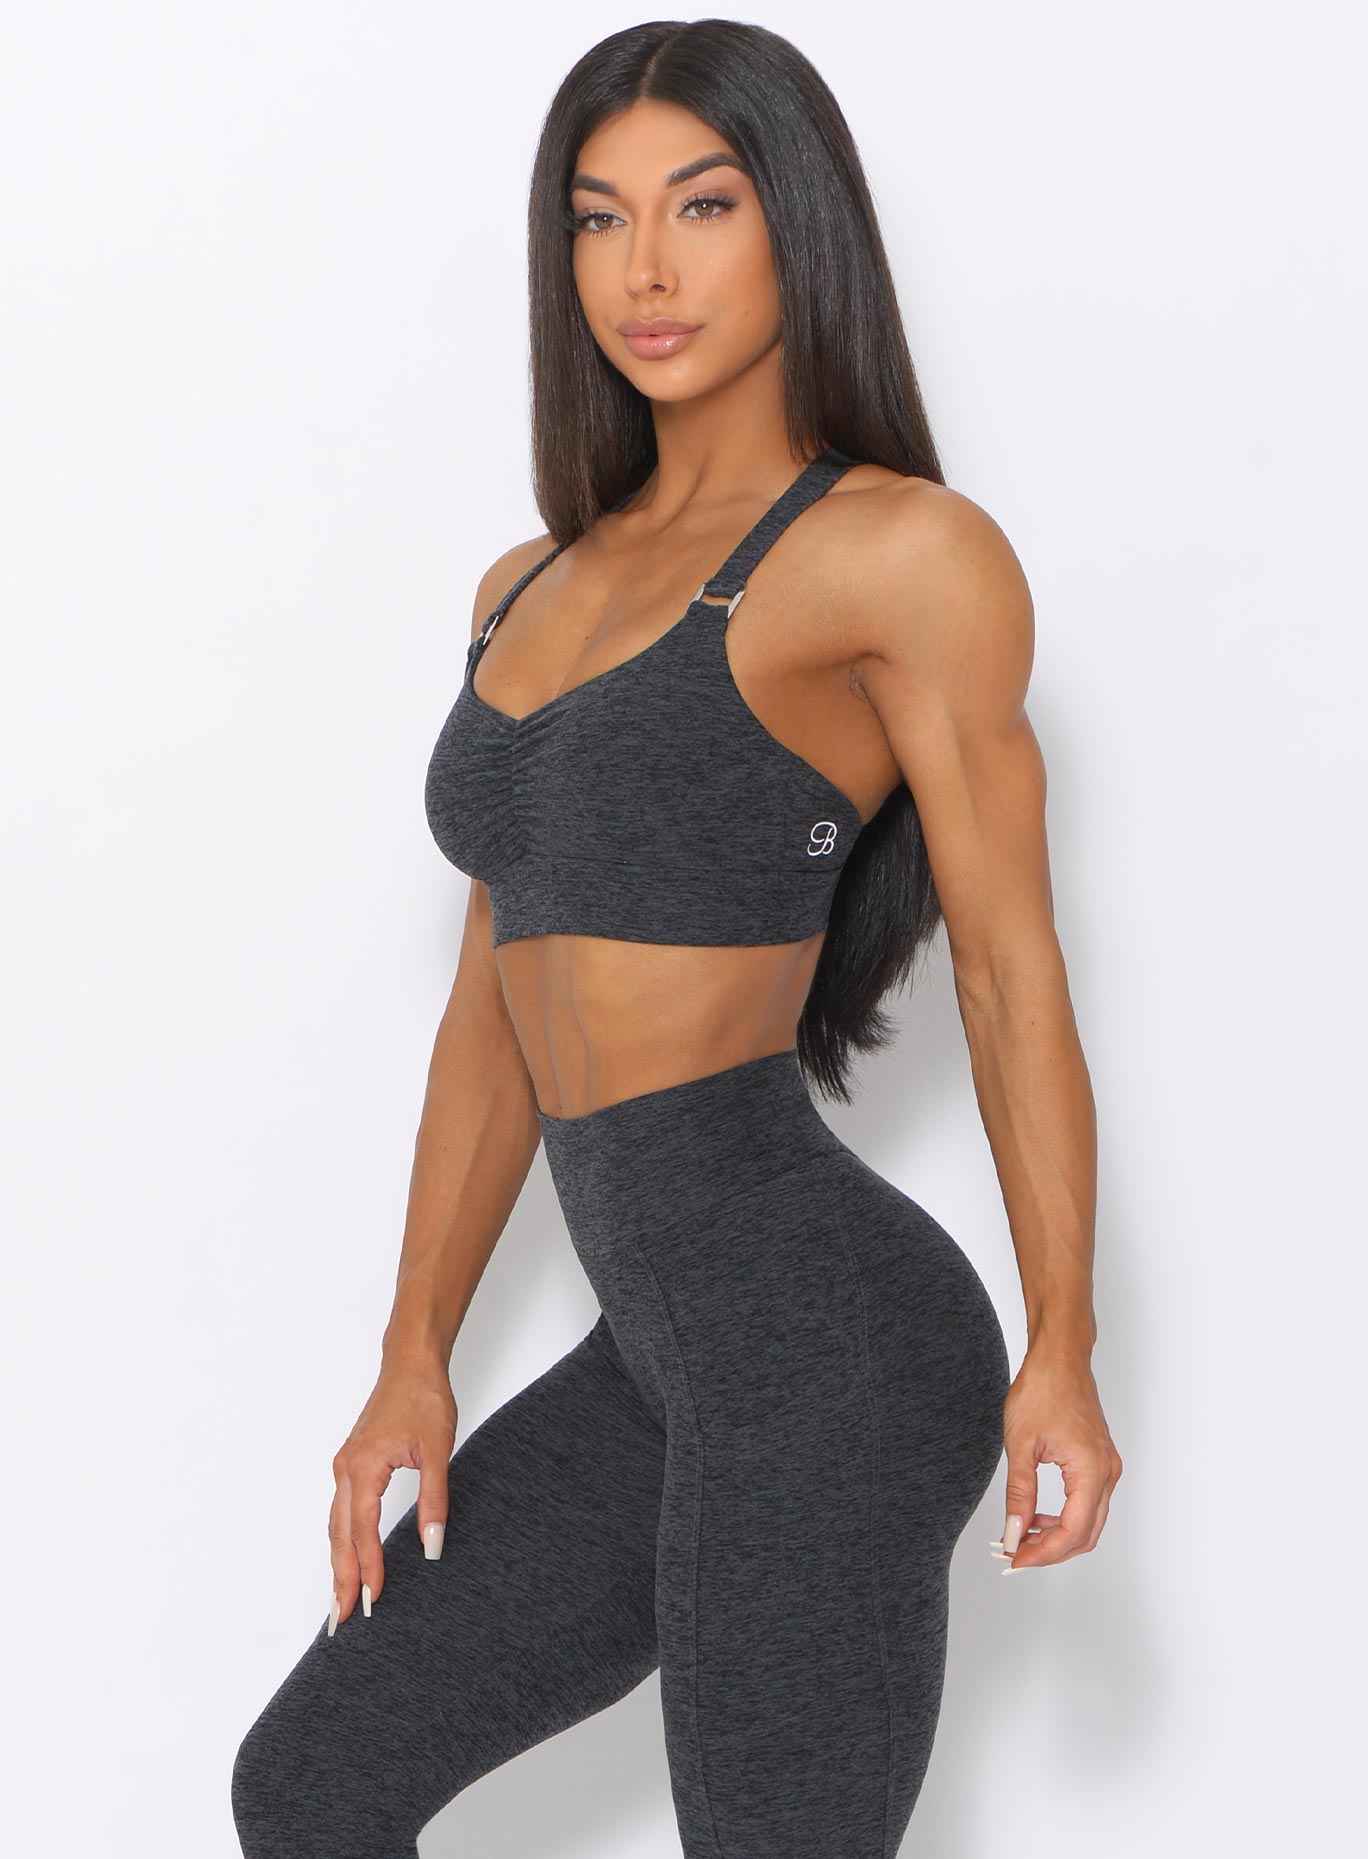 Left side view view of the model wearing our perfection sports bra in charcoal color and a matching high waist leggings